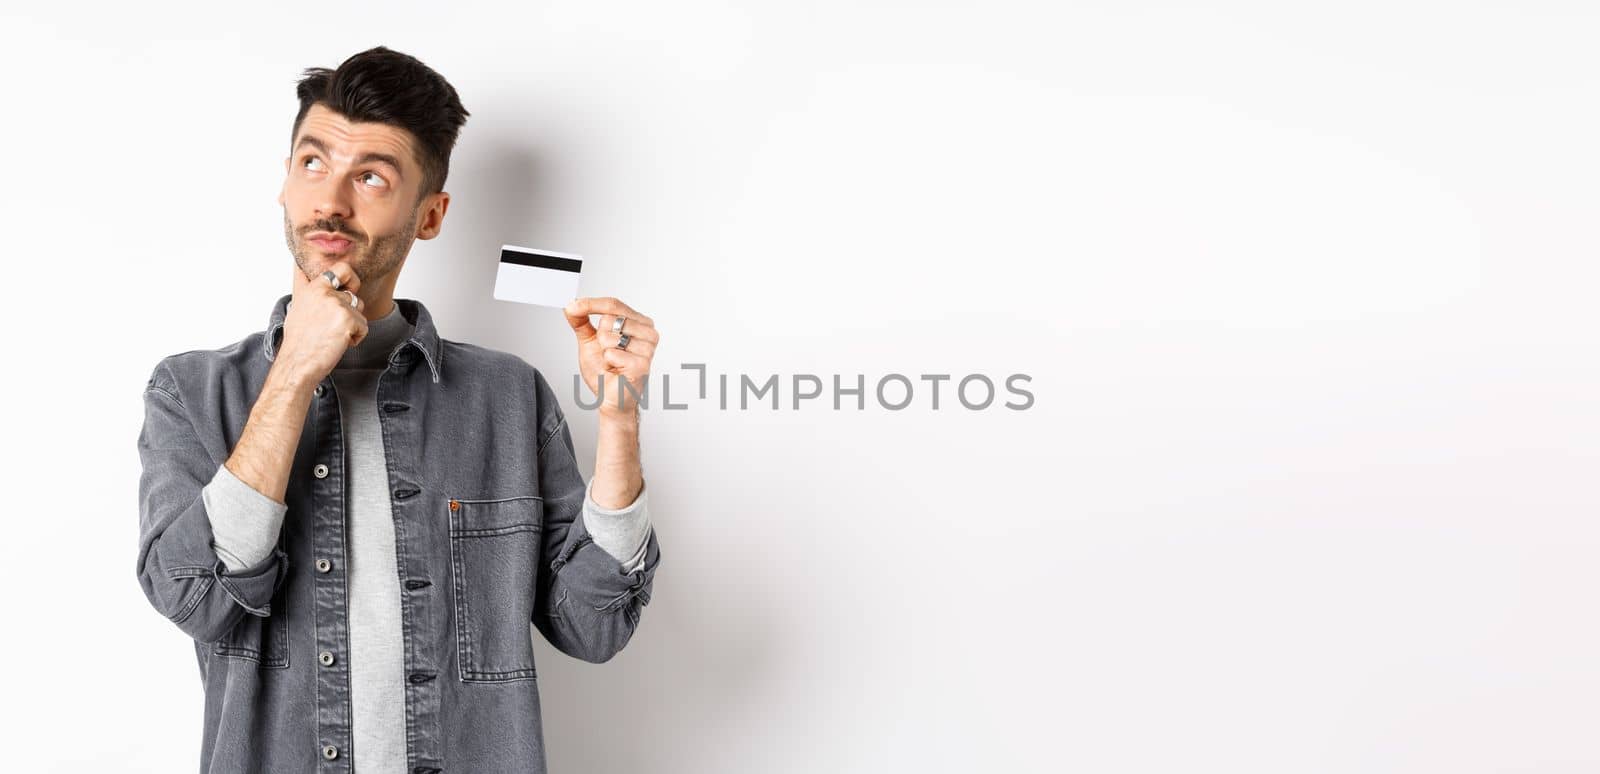 Thoughtful guy looking at upper left corner logo and holding plastic credit card, thinking about shopping, standing on white background.